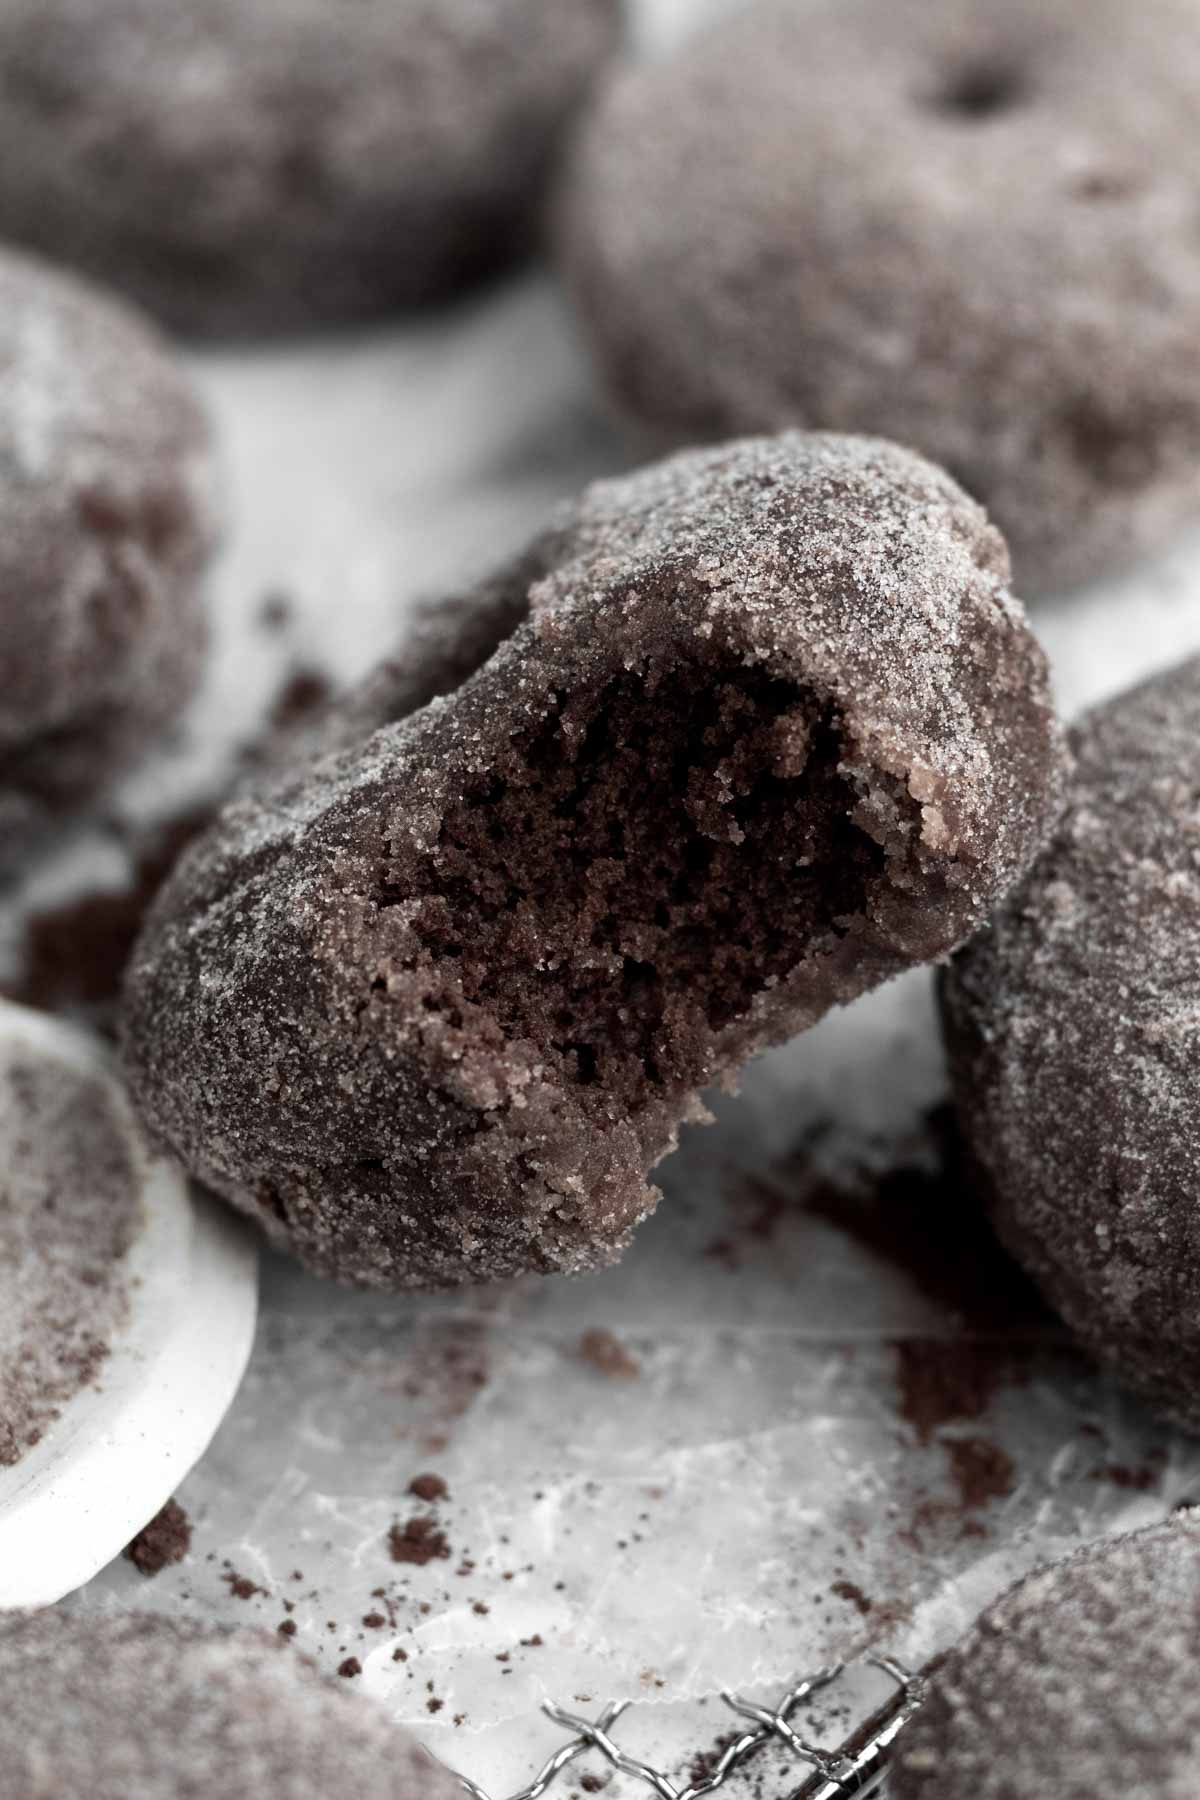 A bite in the sweet crystalized Chocolate Sugared Donuts reveals a warm soft cocoa interior.